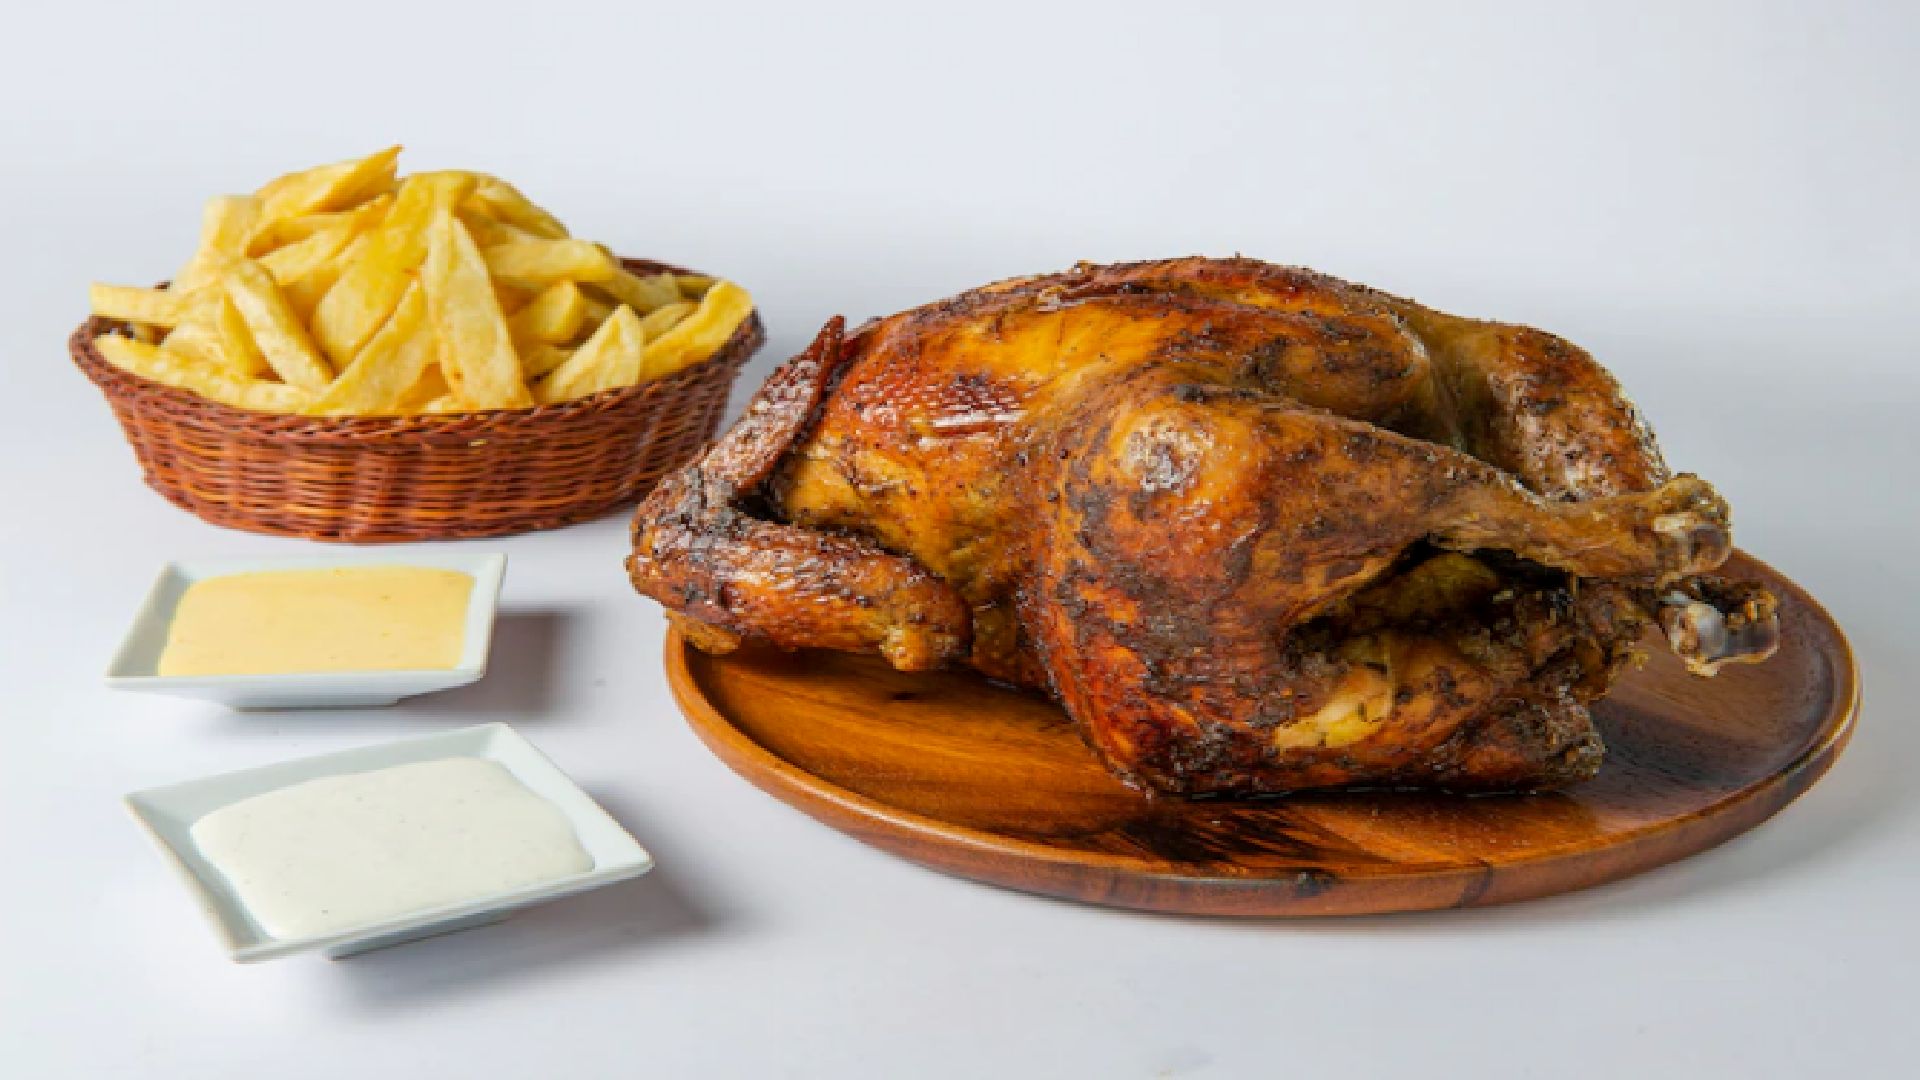 Grilled chicken, another traditional Peruvian dish that was among the best in the world (Freepik)